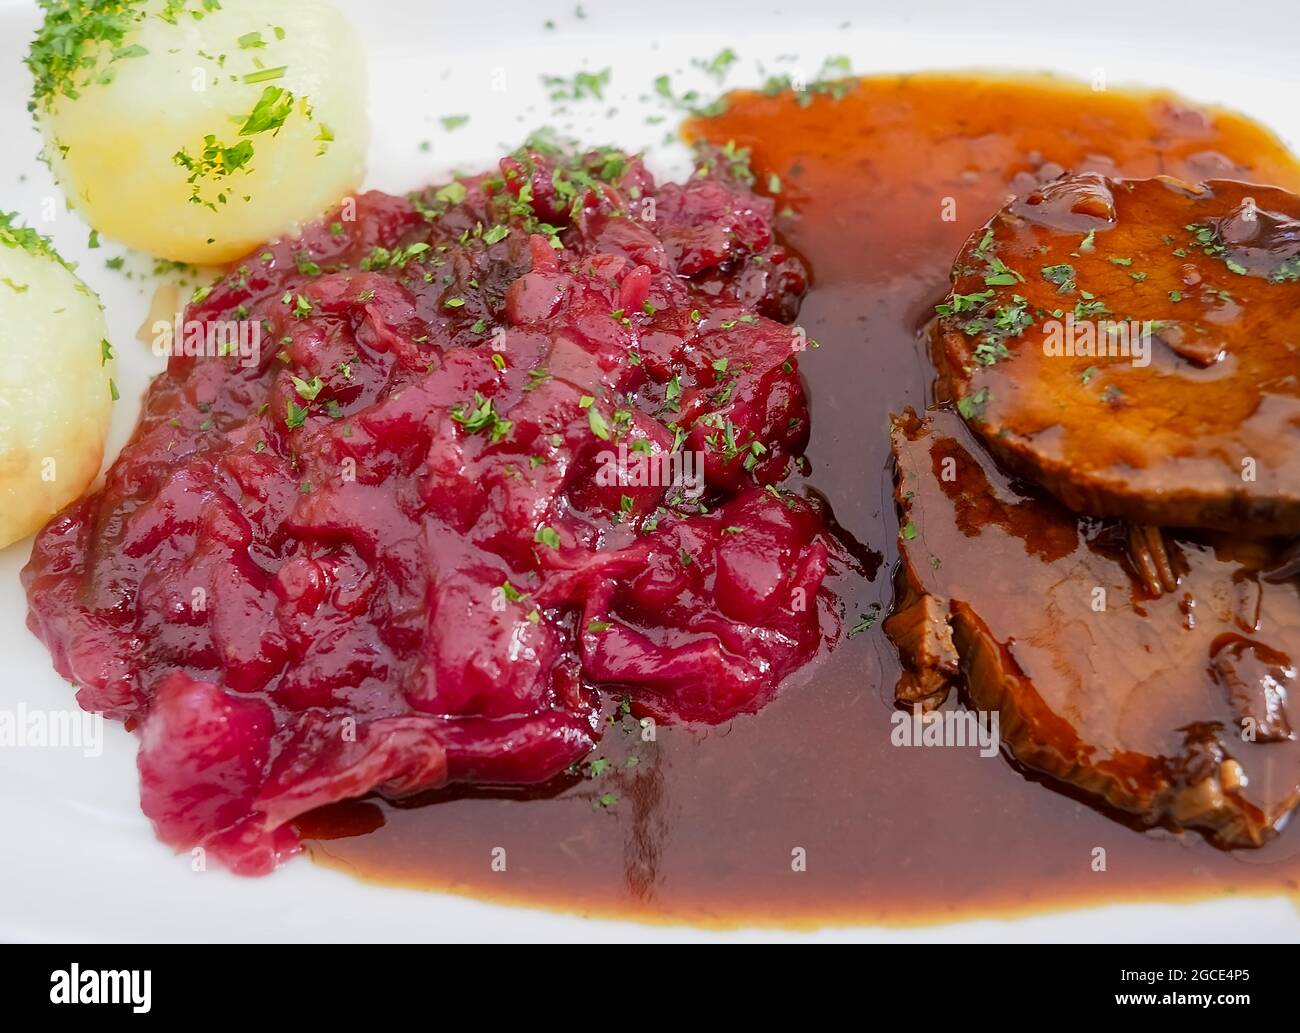 Delicious cooking: Roast beef with sauce, red cabbage and potato dumplings Stock Photo